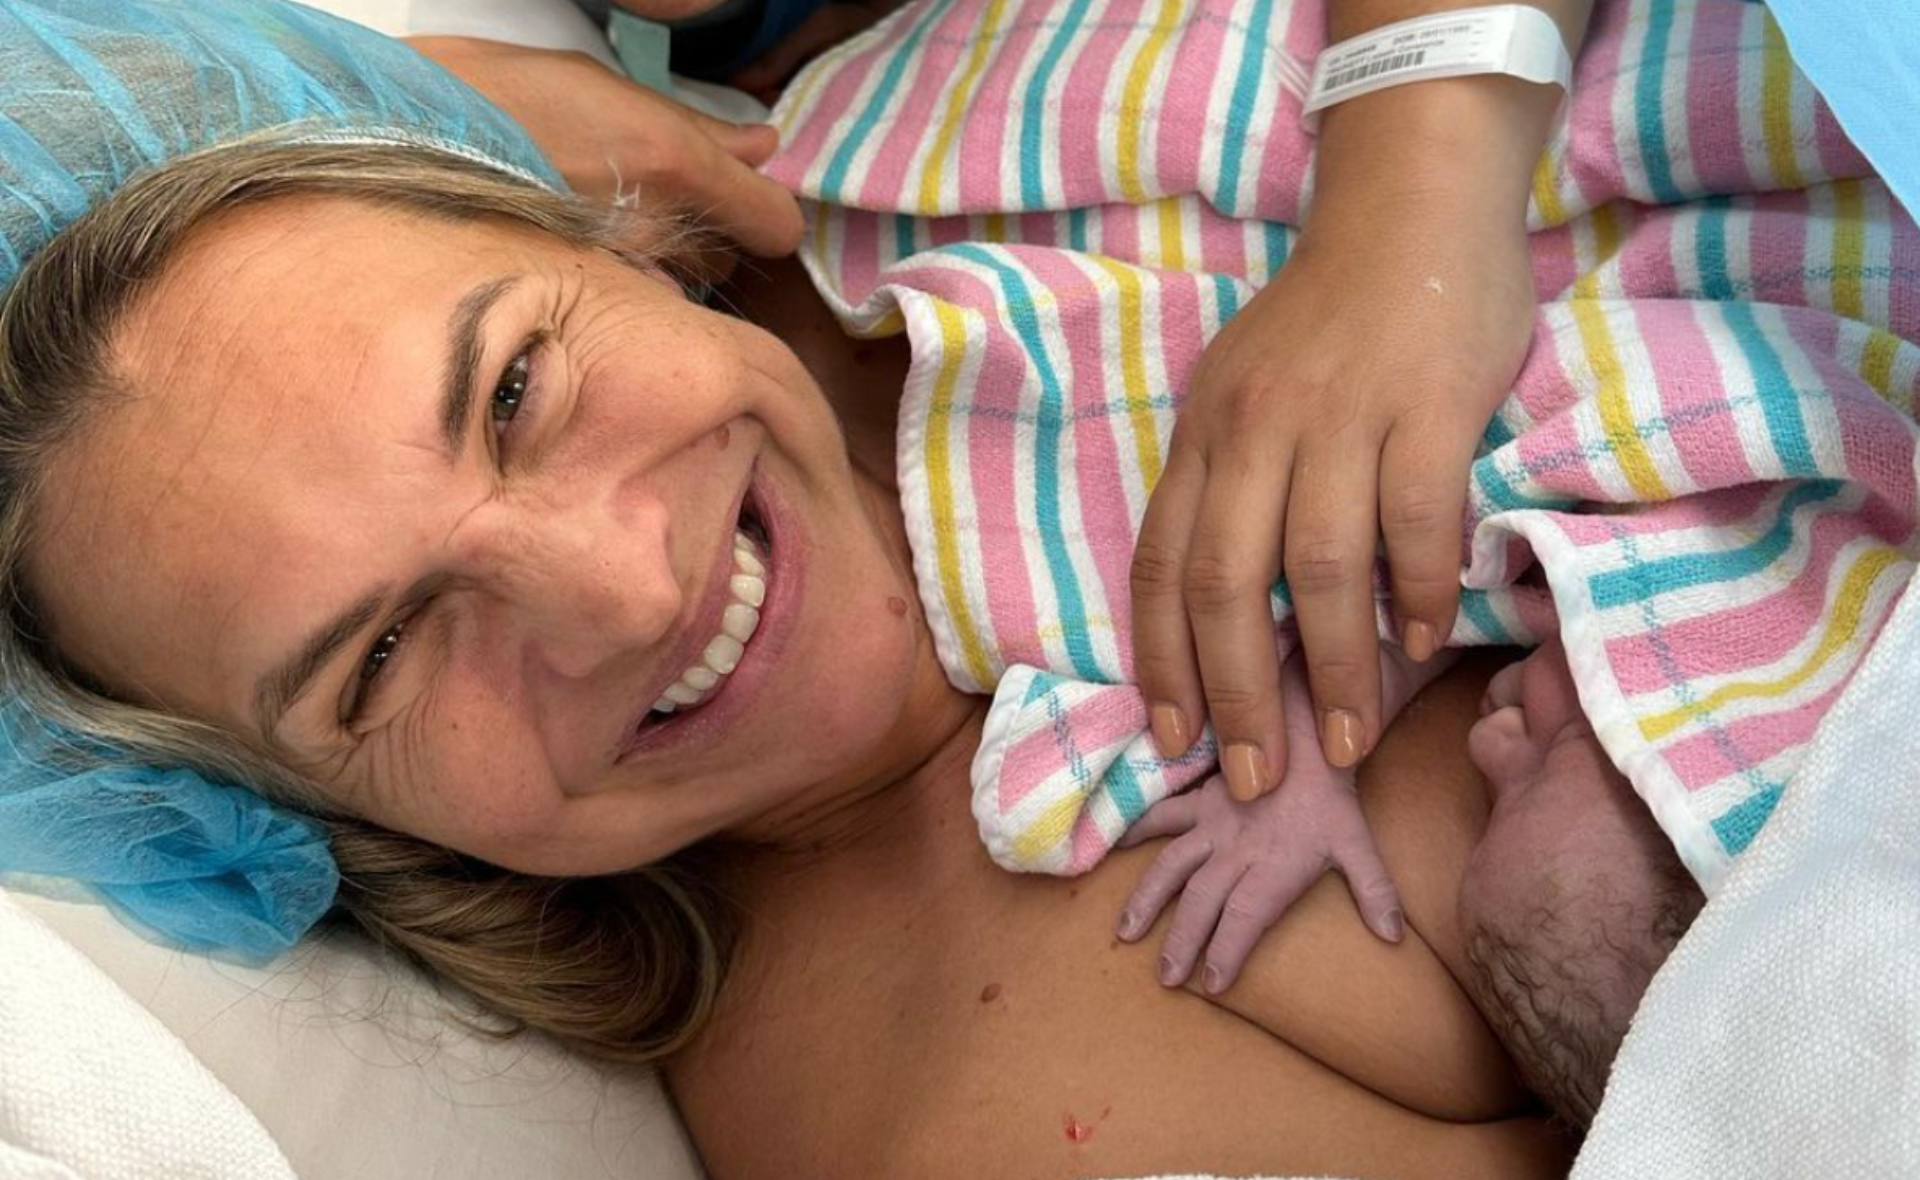 Australian Olympic swimmer Libby Trickett has given birth to her fourth child